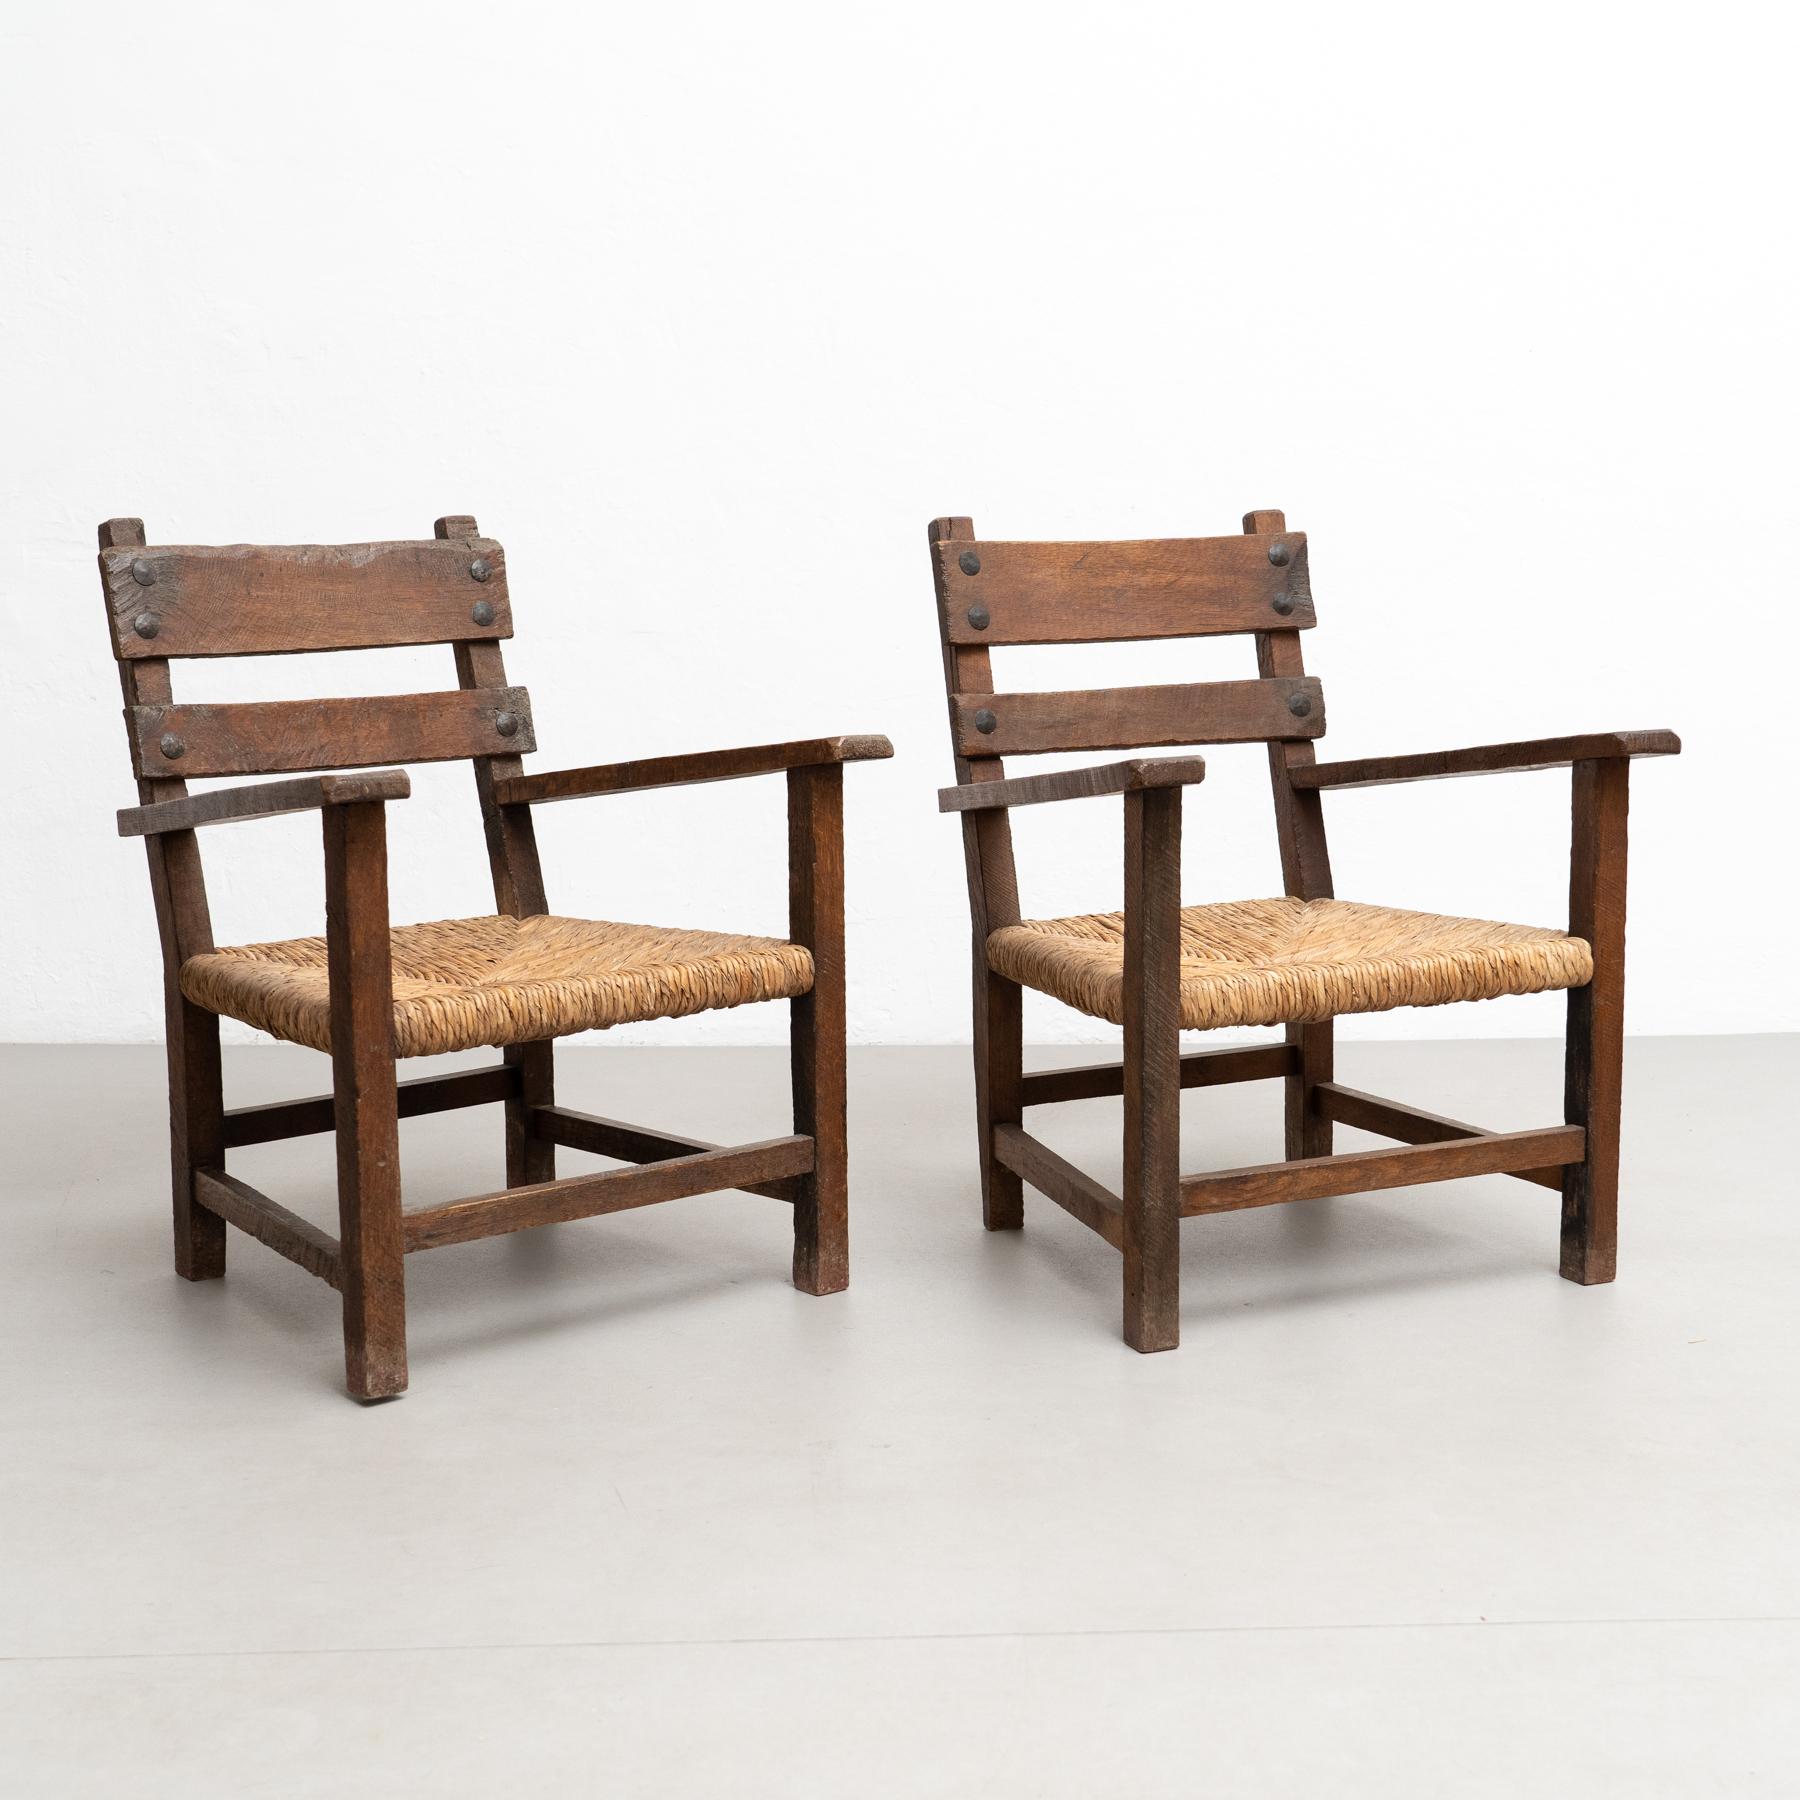 Elevate your living space with this charming set of two rustic armchairs, harkening back to the early 20th century. Crafted with meticulous care, these armchairs showcase a timeless design that seamlessly blends solid wood and rattan.

The sturdy